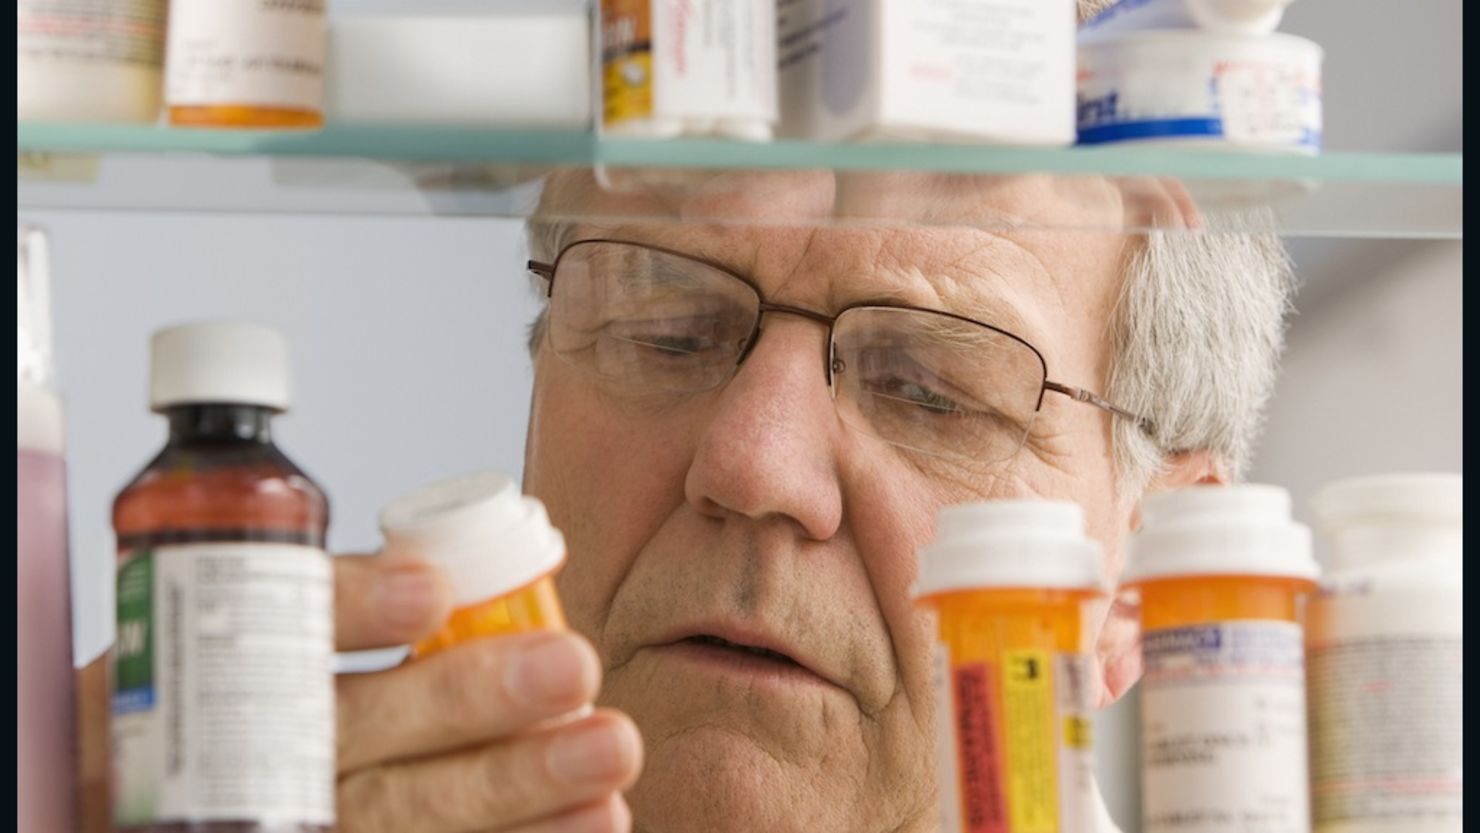 Storage and Shelf Life of Over-the-Counter Medication